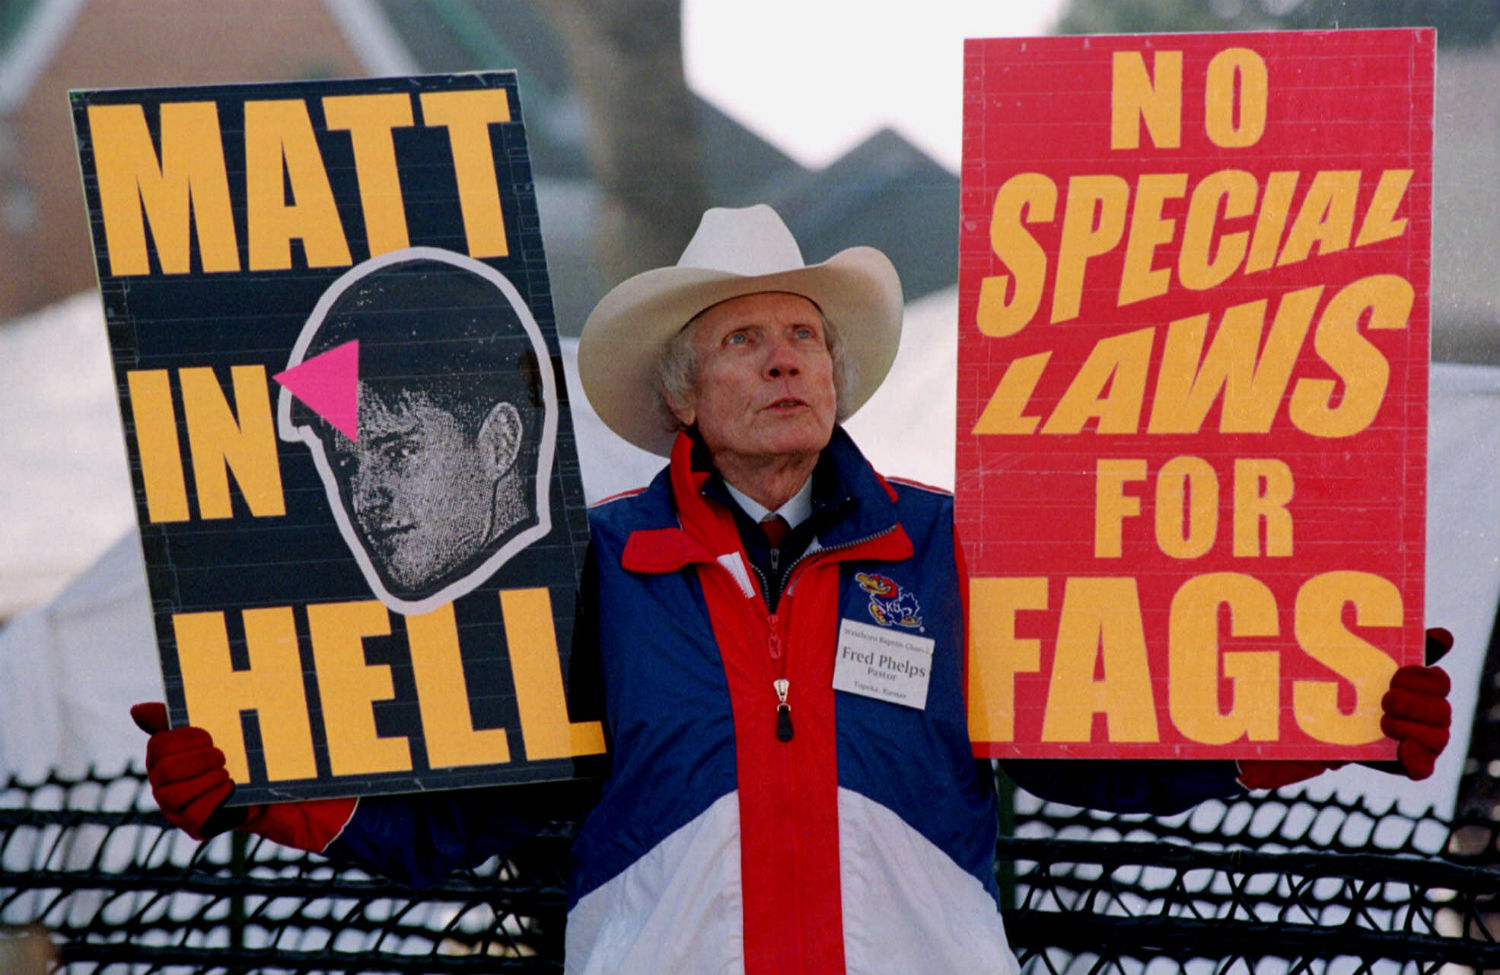 Fred Phelps: The Death of a Useful Bigot